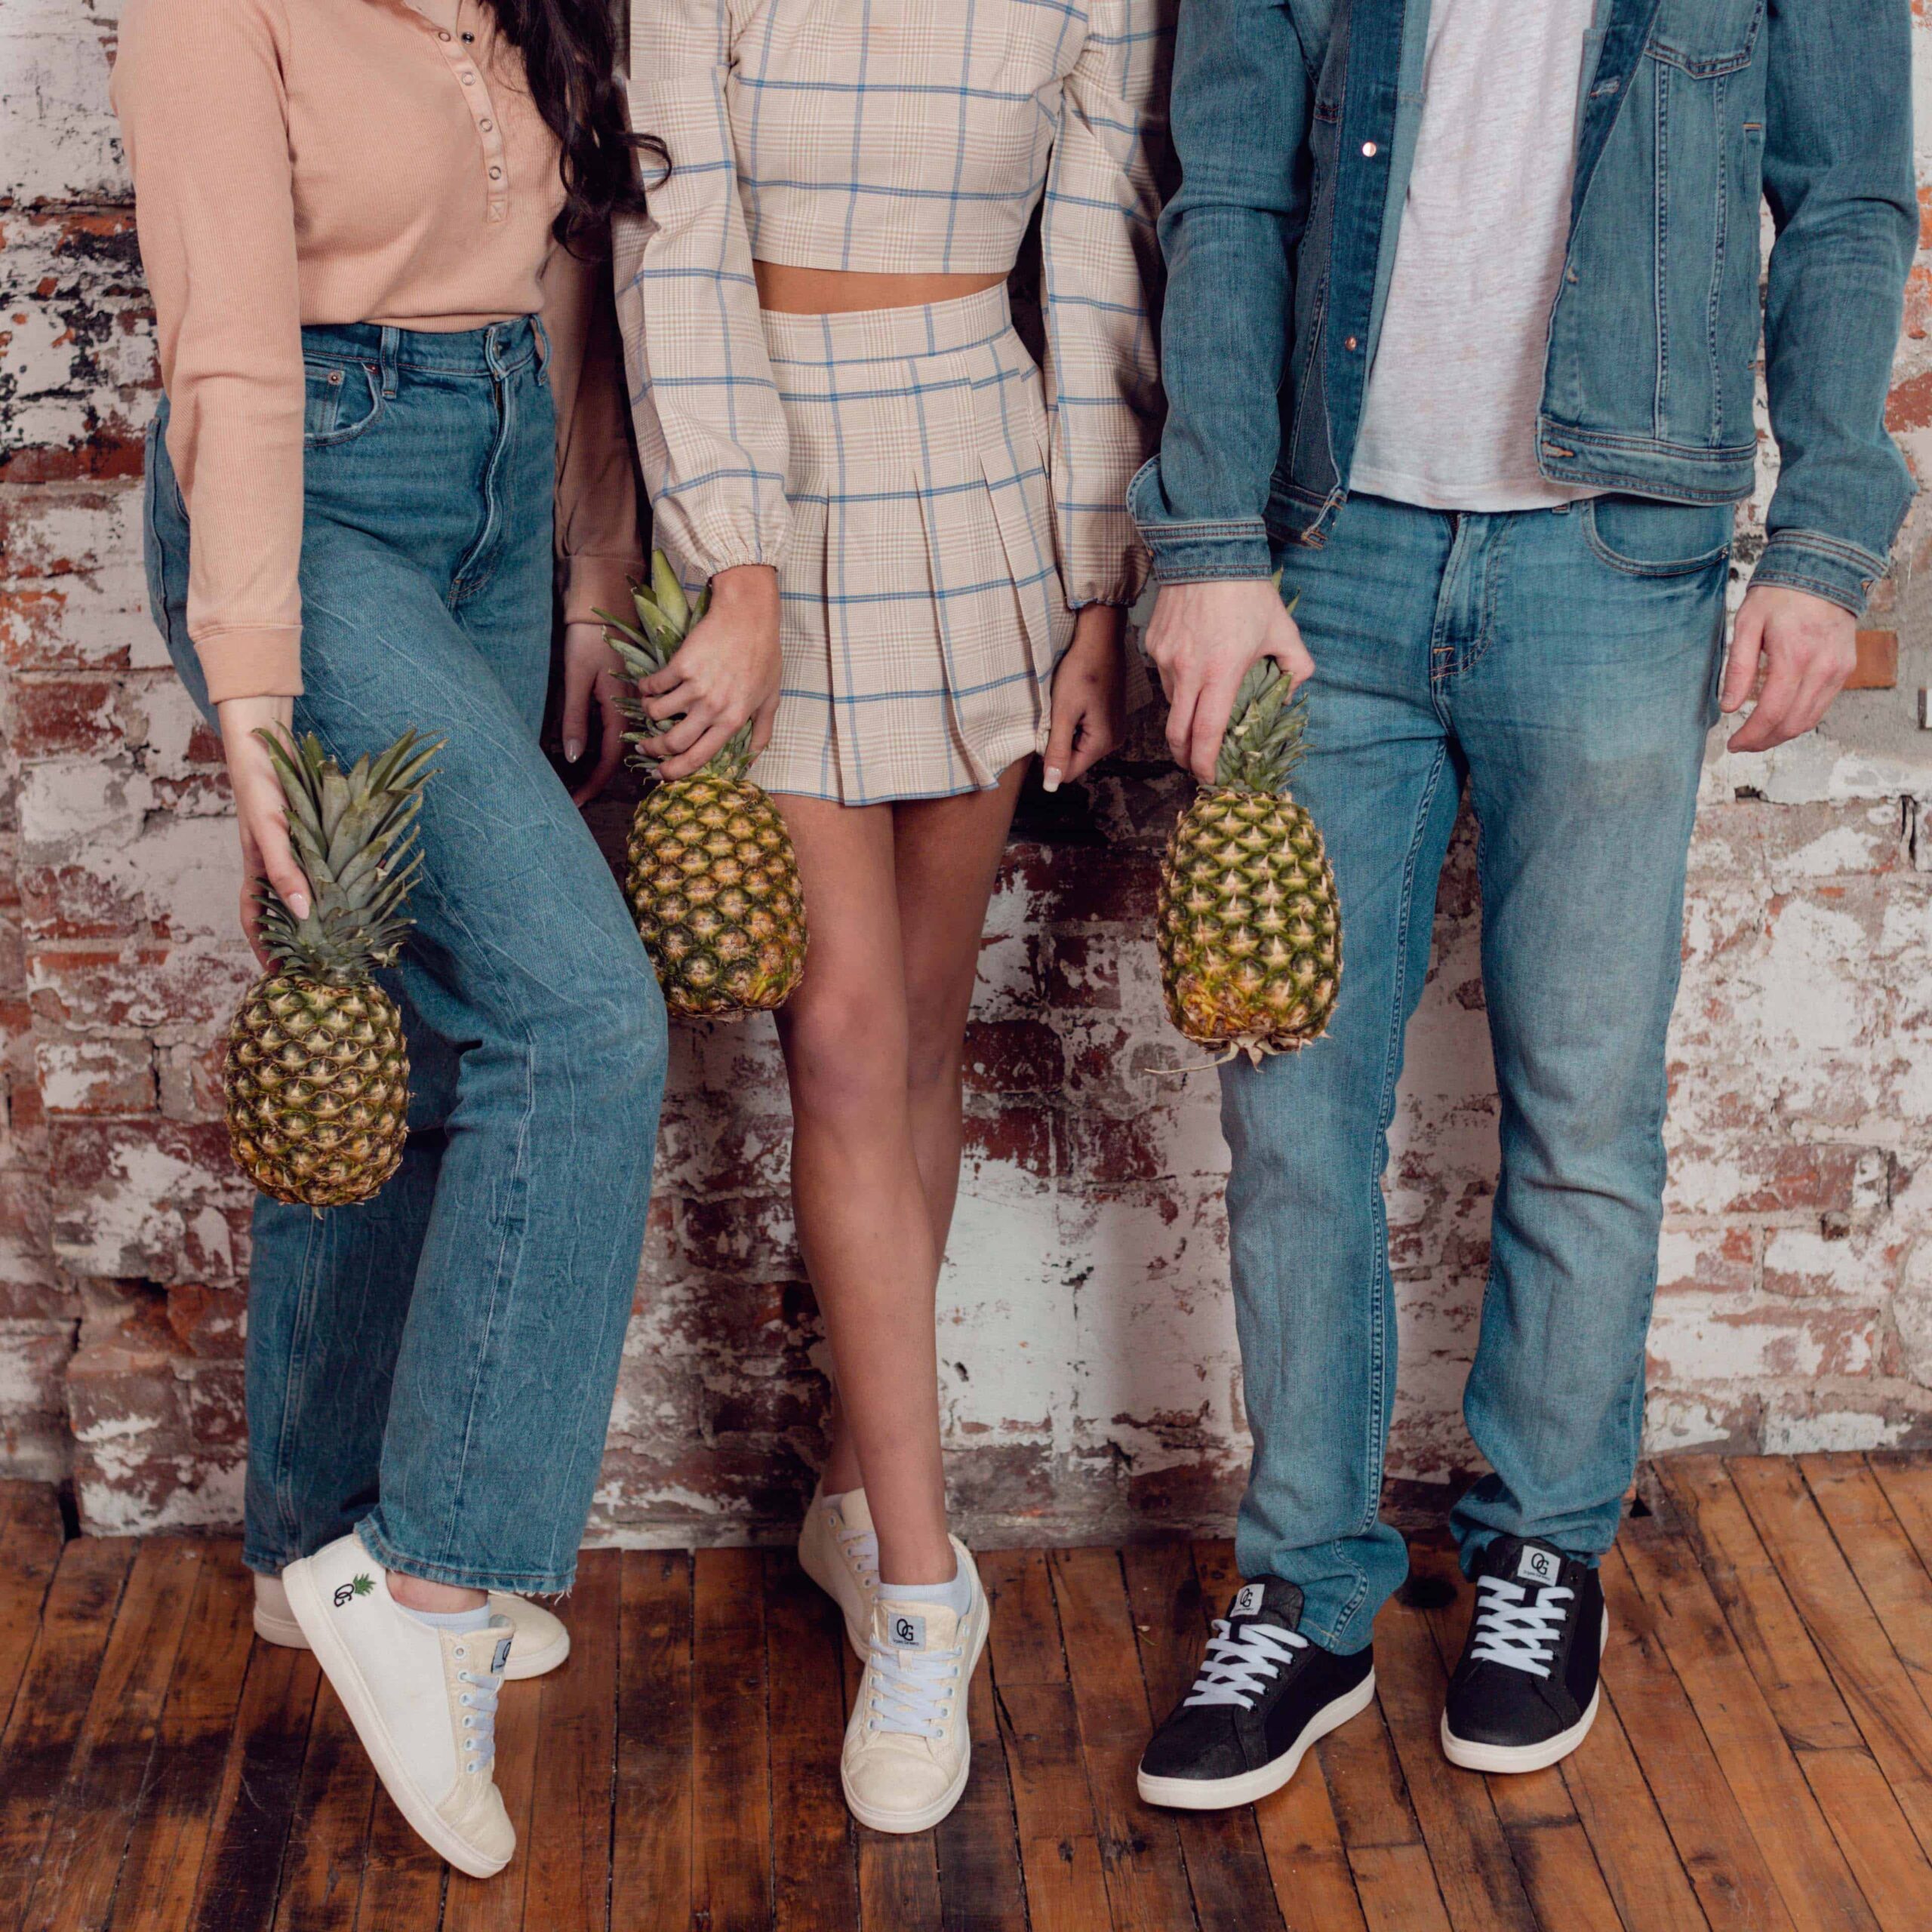 vegan shoes made from pineapple leather and hemp from organic garments